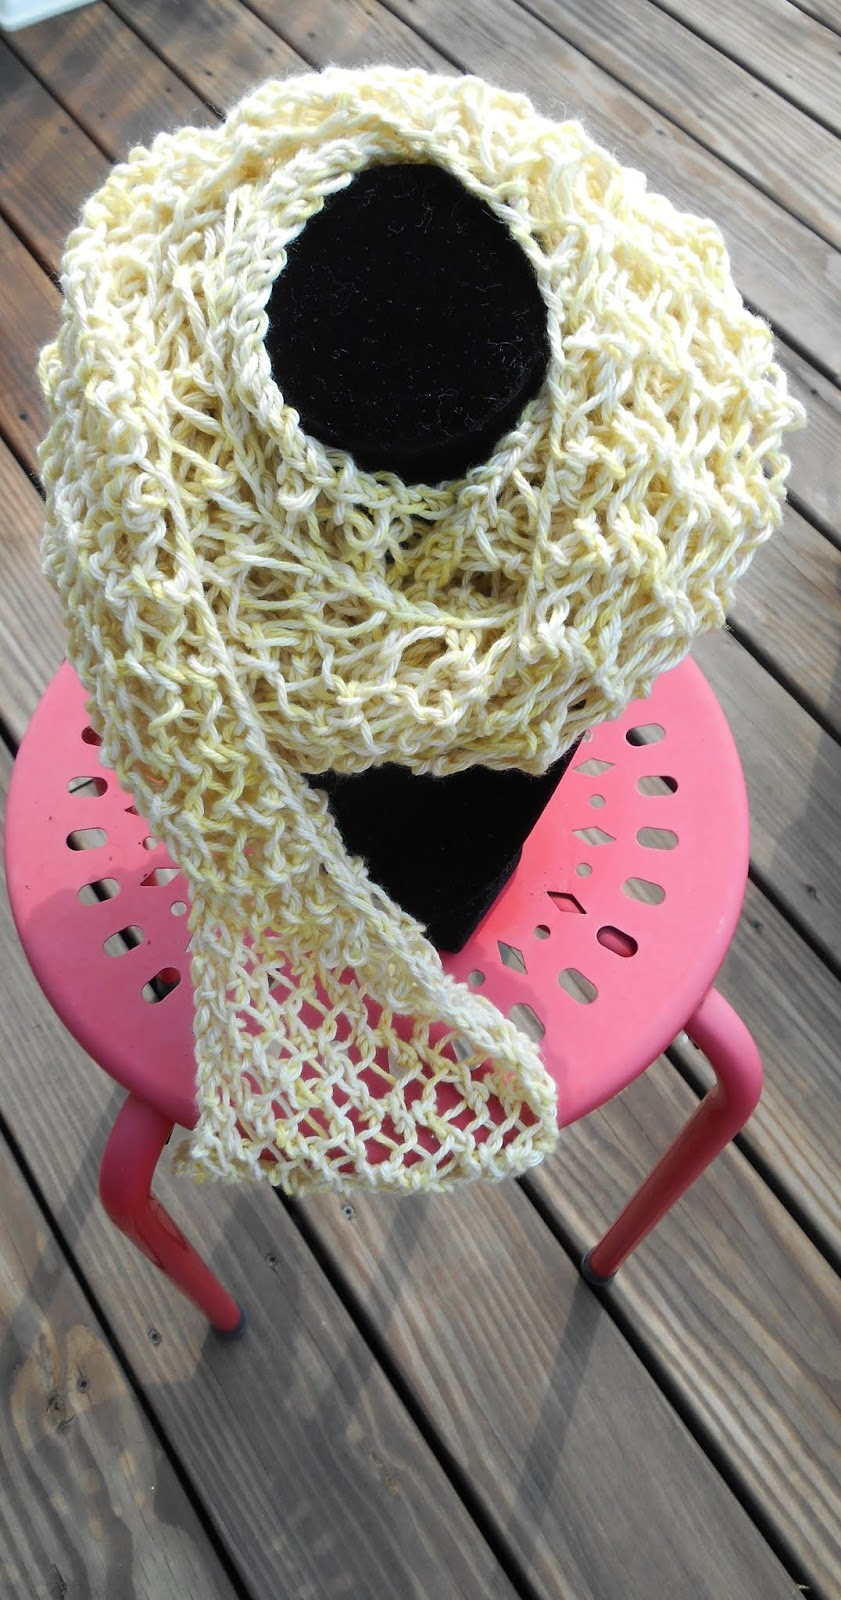 Open Knit Scarf Pattern Knitting With Schnapps Introducing The Breezes To Gusts Scarf